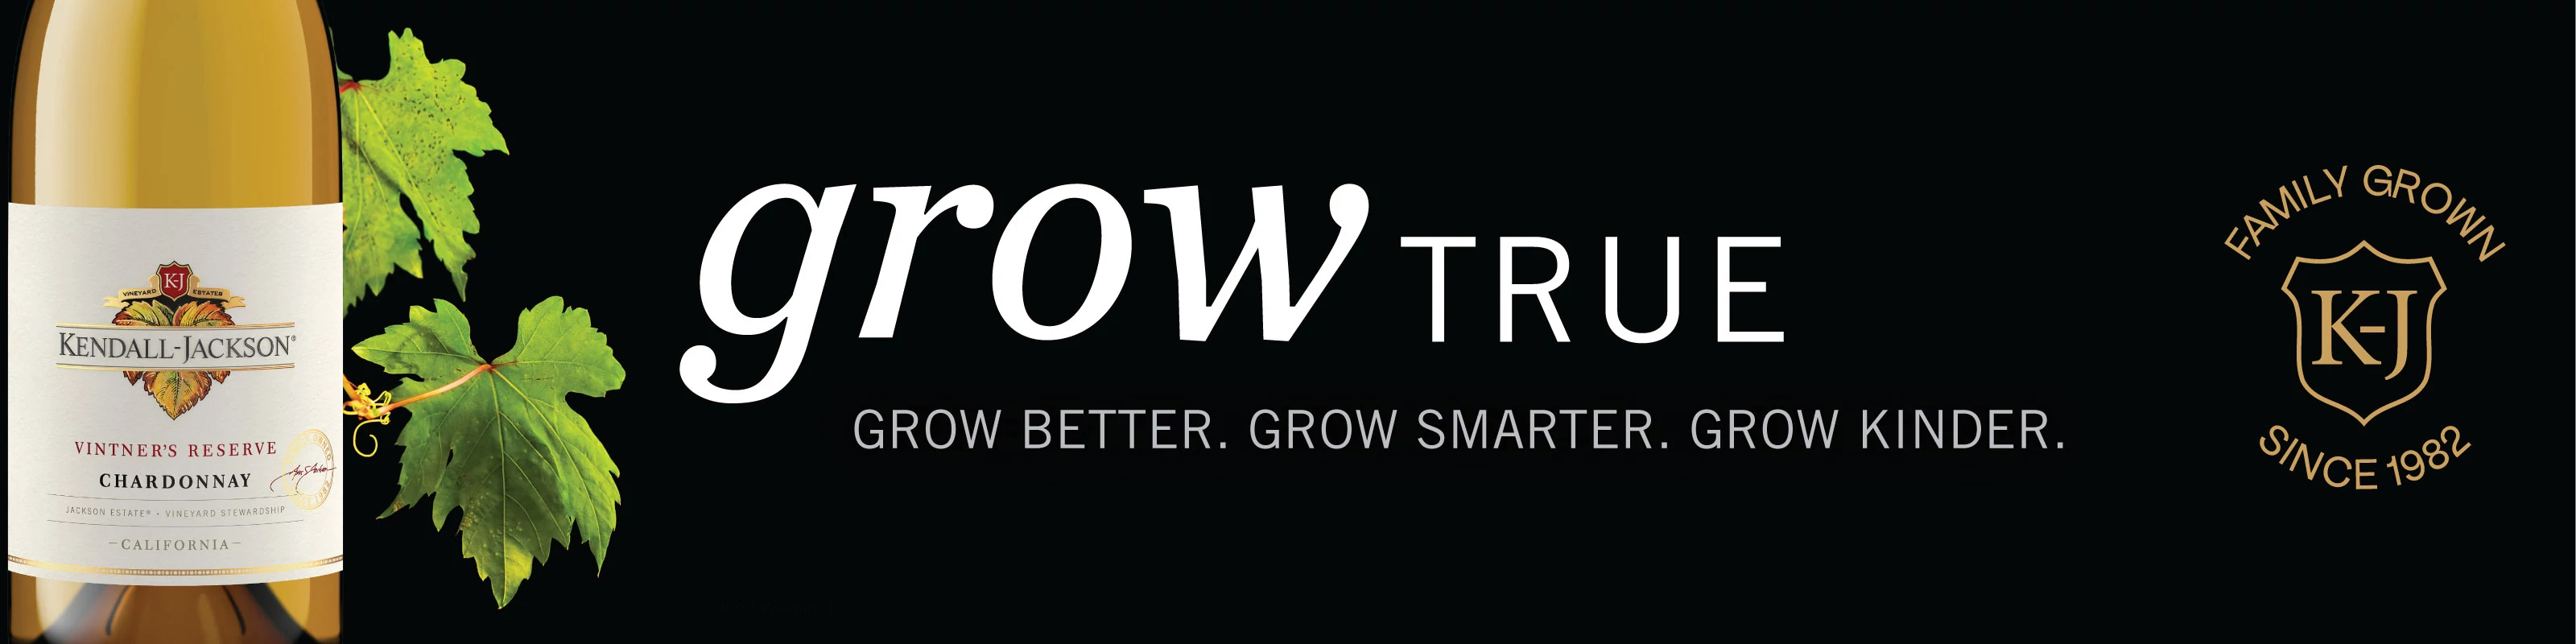 Grow True with Kendall-Jackson Wines